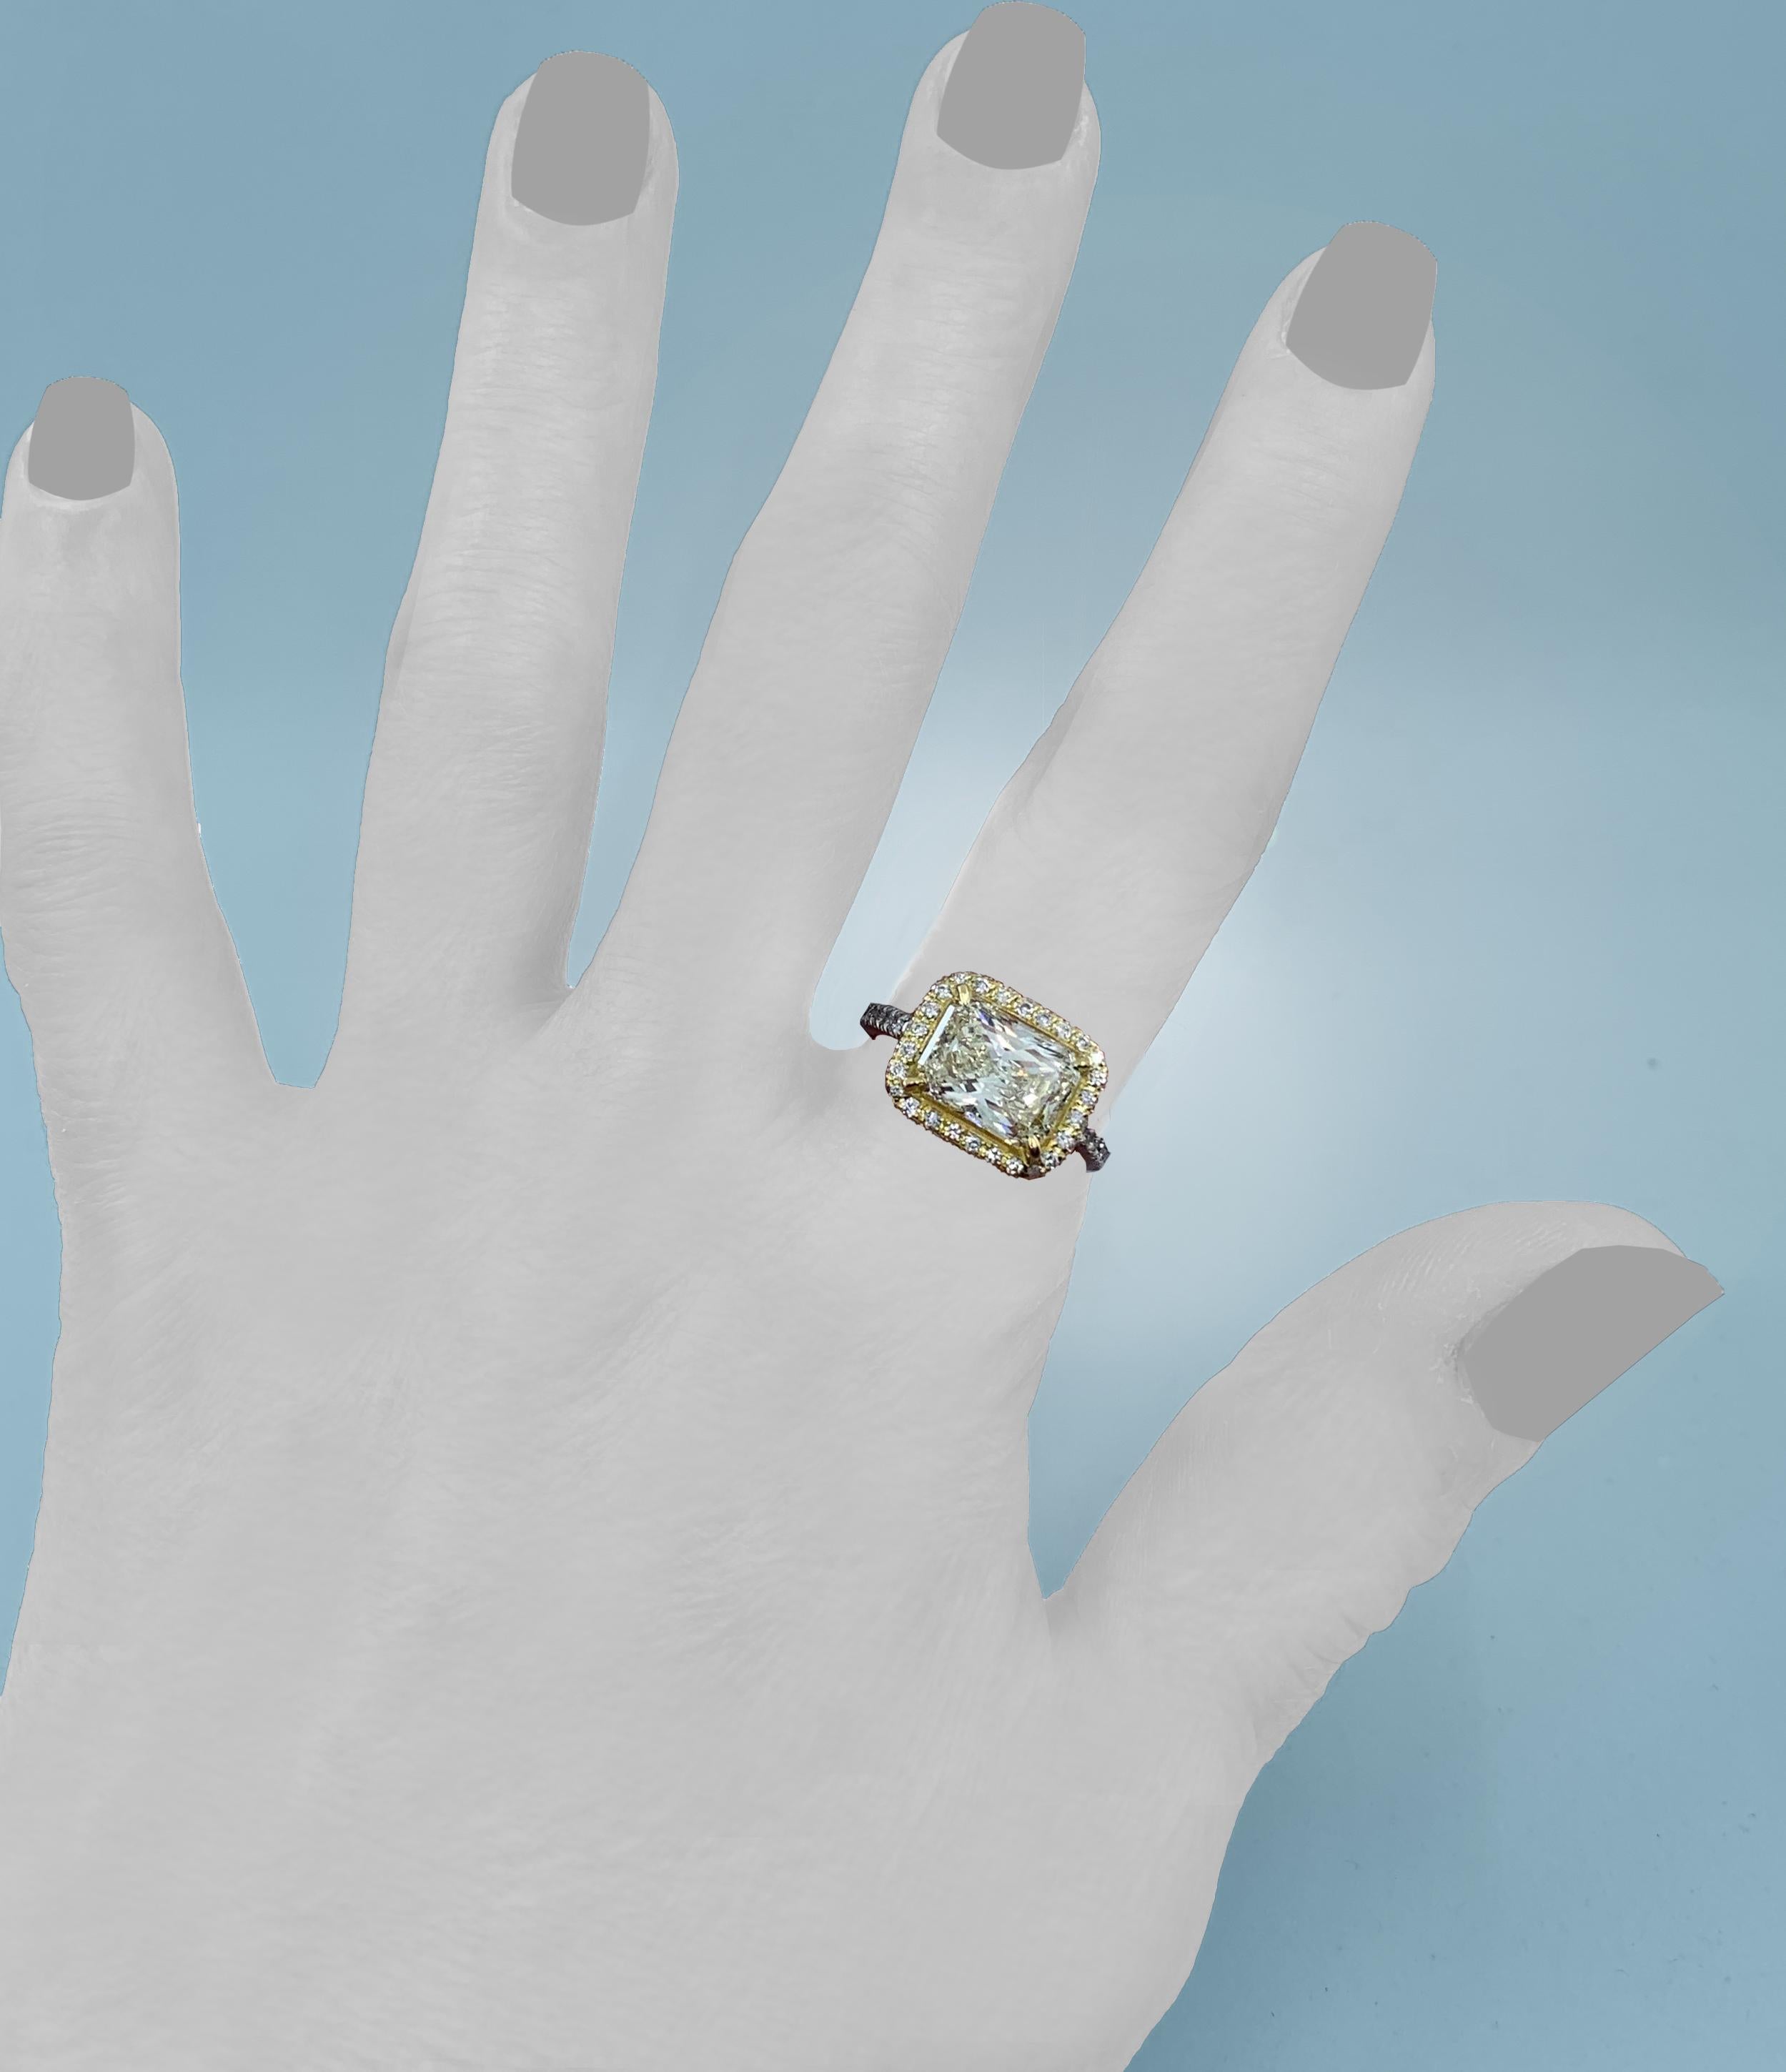 Eytan Brandes made the gorgeous mounting that perfectly showcases this clean, natural and untreated light yellow diamond.  

The prongs and frame are in 18 karat yellow gold to accentuate the stone's pale yellow hue;  the strong yellow of the frame